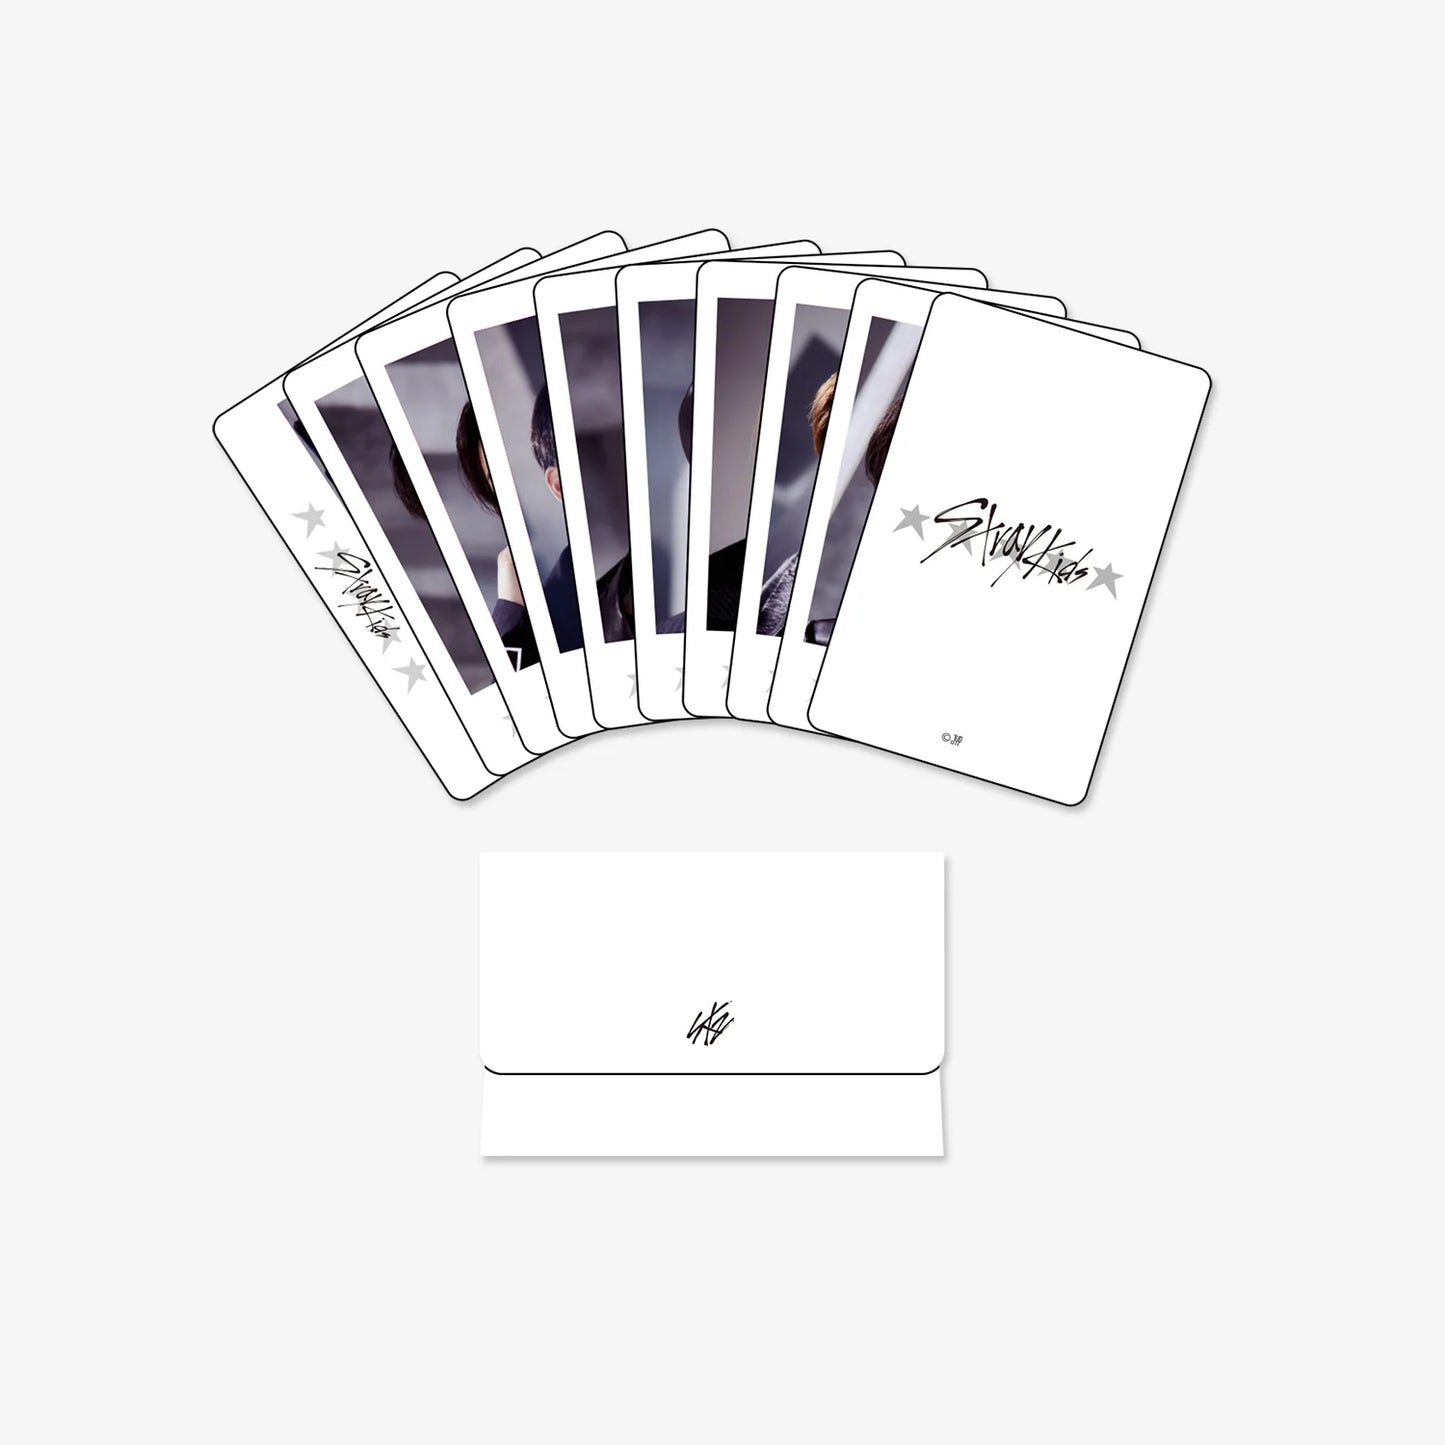 STRAY KIDS 5 STAR DOME TOUR 2023 JAPAN OFFICIAL PHOTOCARDS SET A